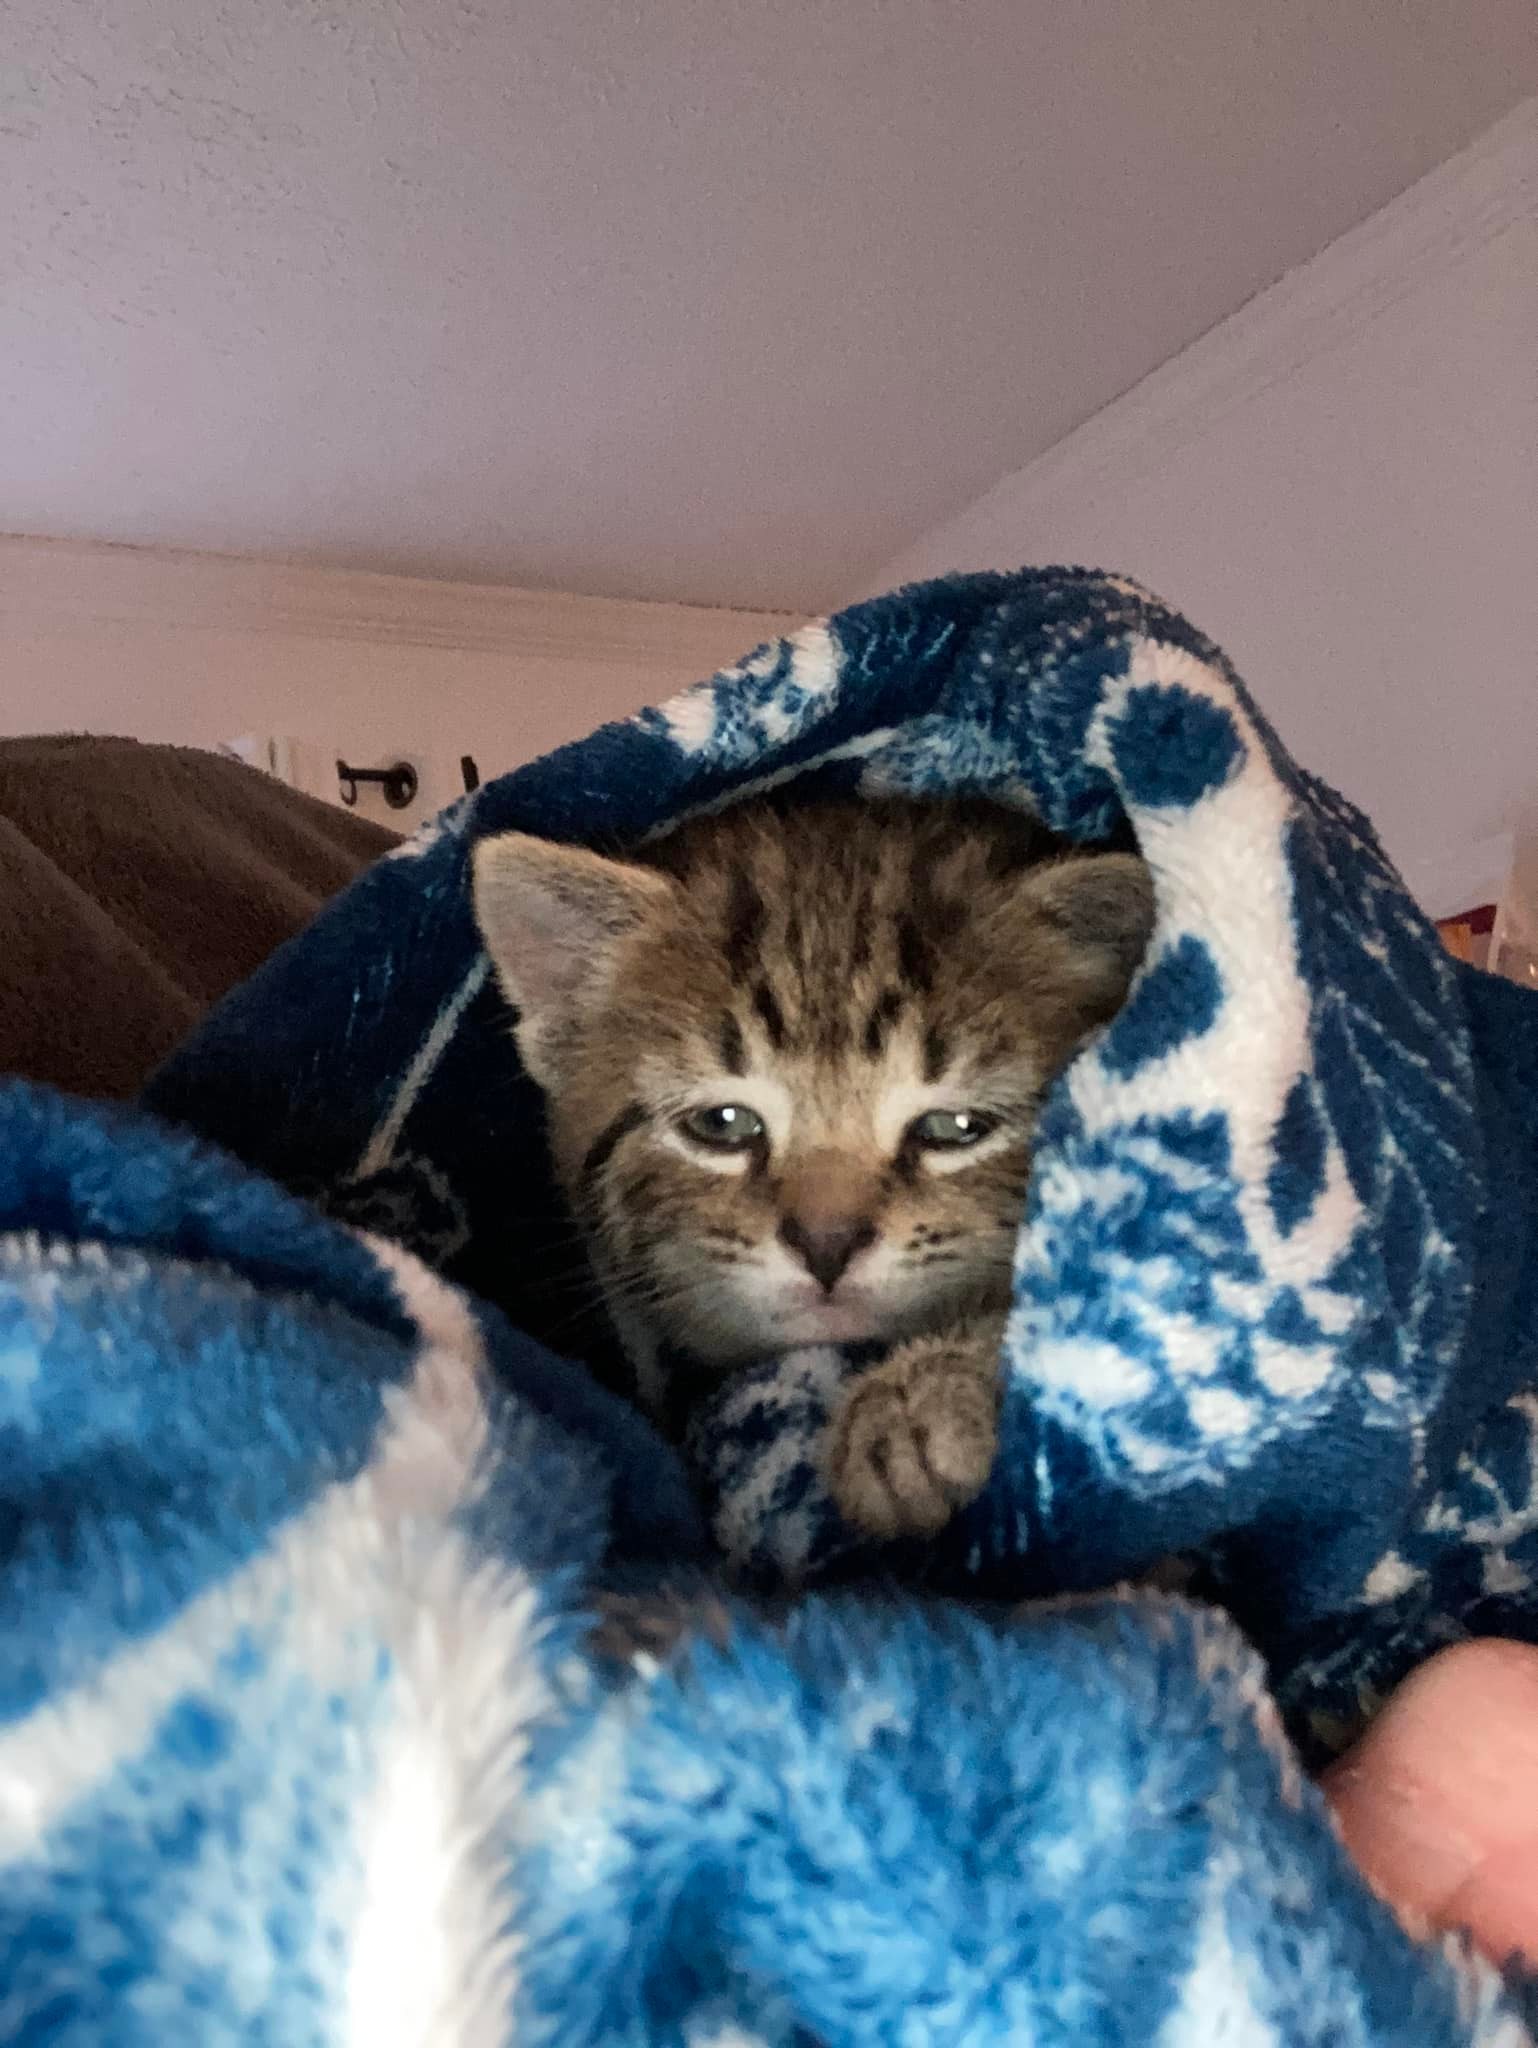 a small kitten named matilda bundled up in a blue and white blanket. she looks sleepy.